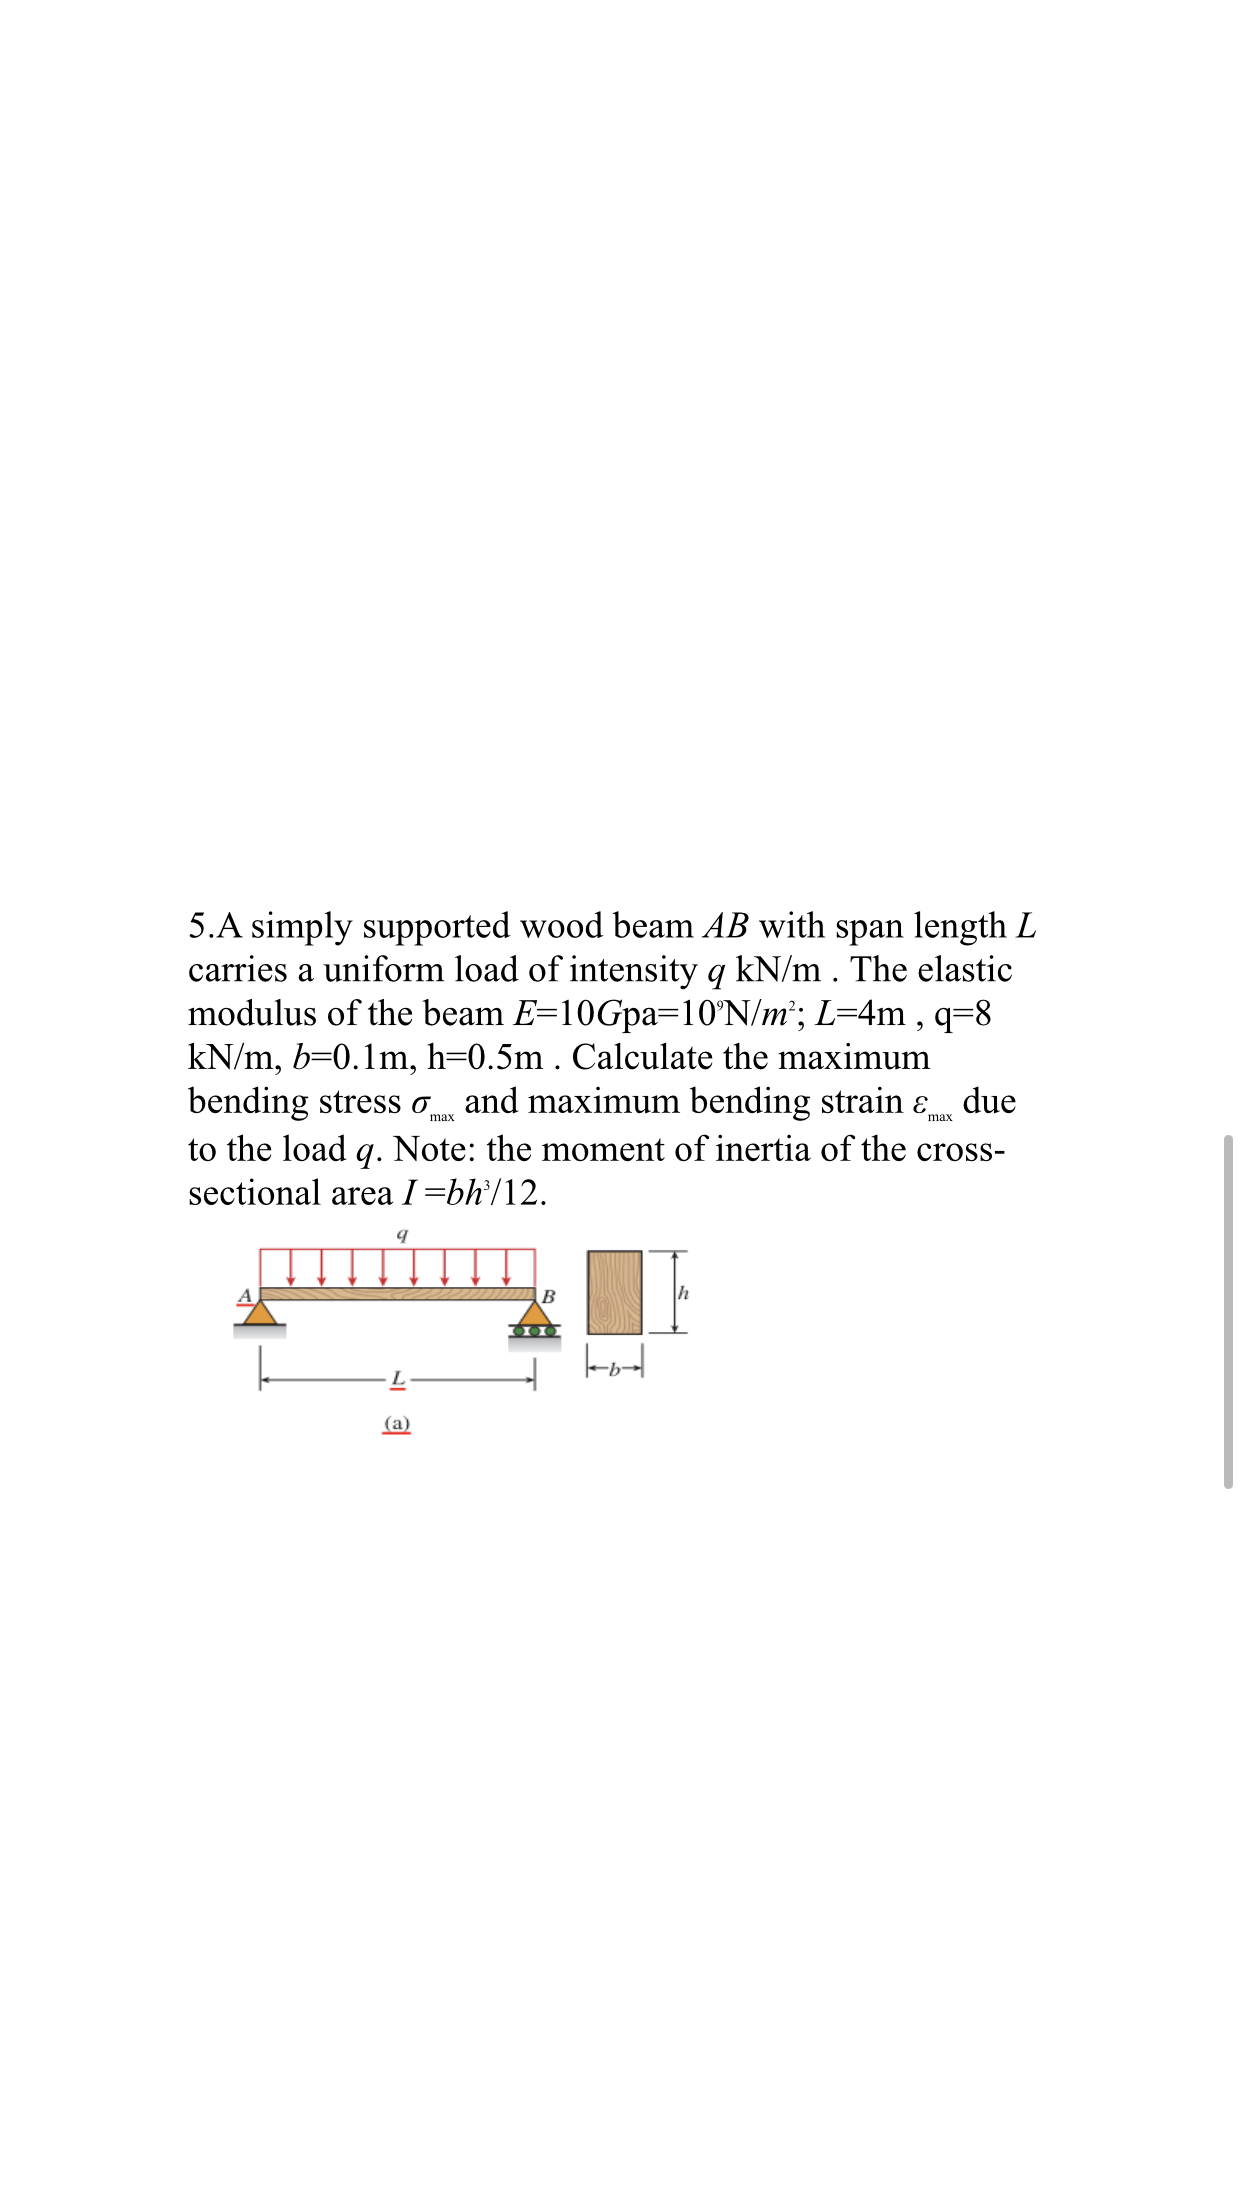 5.A simply supported wood beam AB with span length L
carries a uniform load of intensity q kN/m . The elastic
modulus of the beam E=10Gpa=10°N/m²; L=4m , q=8
kN/m, b=0.1m, h=0.5m . Calculate the maximum
due
bending stress o and maximum bending strain ɛ,
max
to the load q. Note: the moment of inertia of the cross-
sectional area I=bh°/12.
